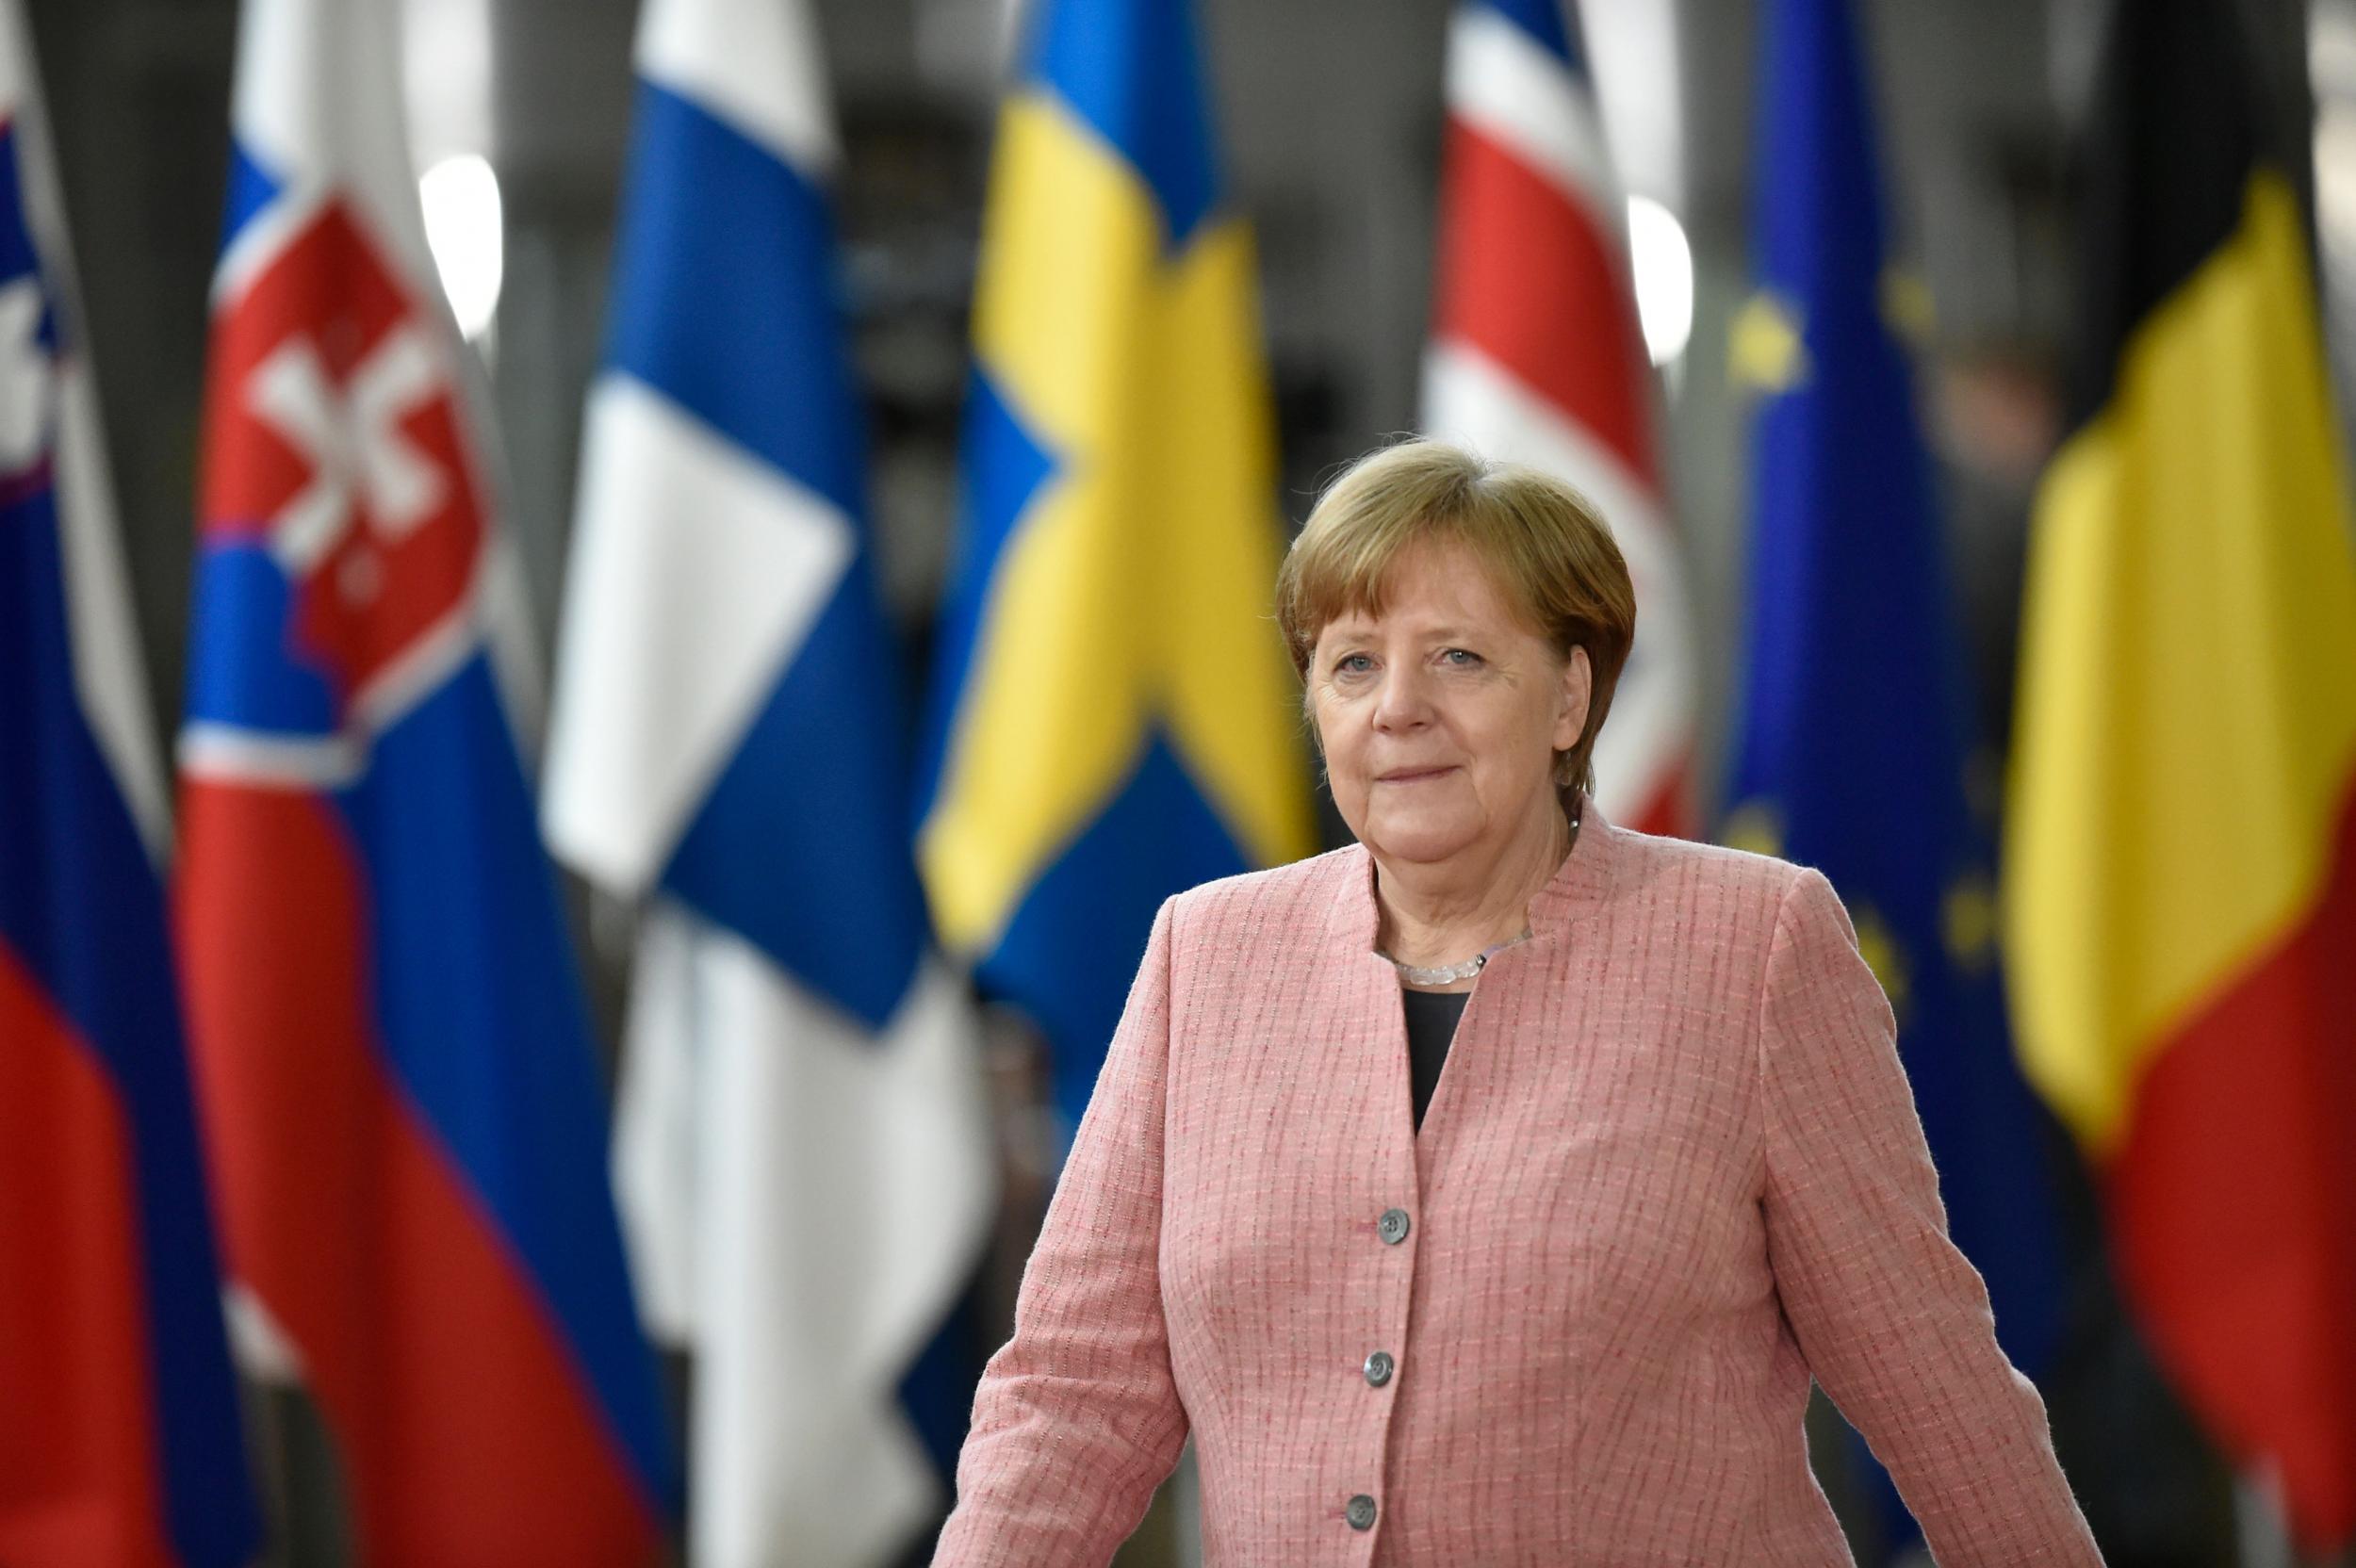 Angela Merkel has faced a domestic political showdown over migration in recent weeks